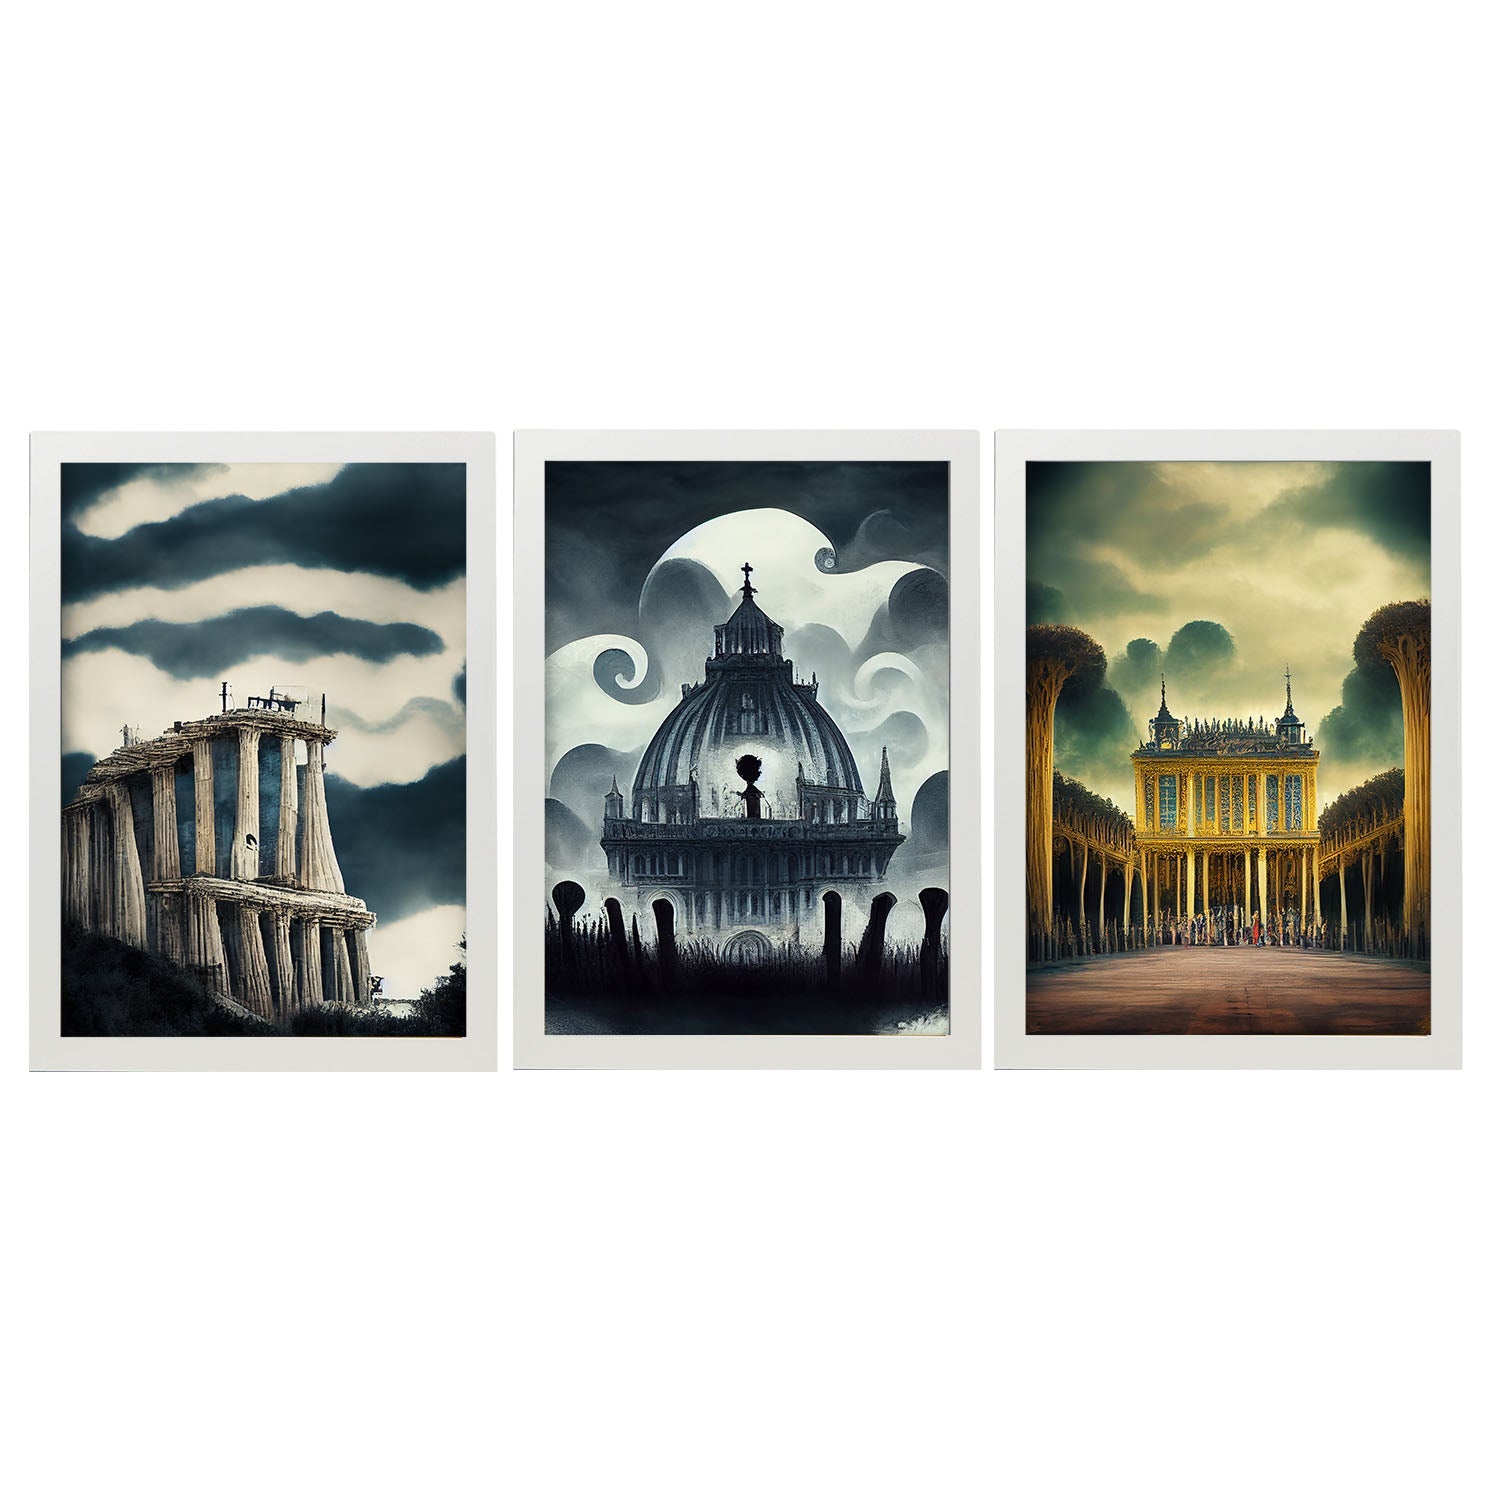 Burton style Illustrations of monuments and cities inspired by Burton's Dark and Goth art Interior Design and Decoration Set Collection 4-Artwork-Nacnic-A4-Marco Blanco-Nacnic Estudio SL